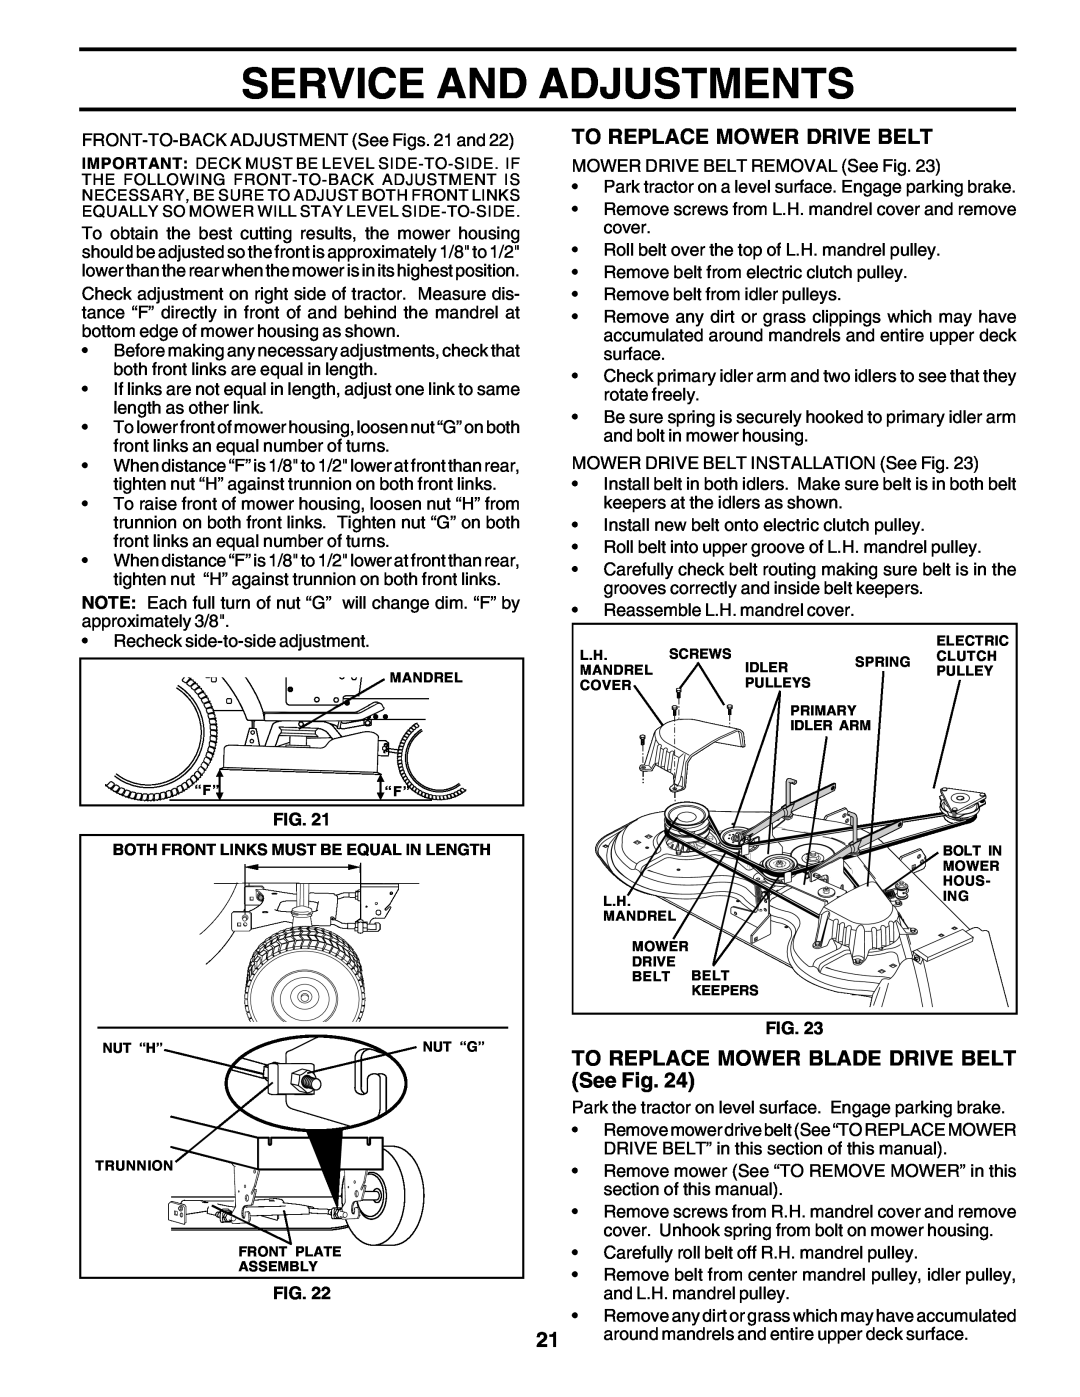 Poulan PRGT22H50D Service And Adjustments, To Replace Mower Drive Belt, TO REPLACE MOWER BLADE DRIVE BELT See Fig 